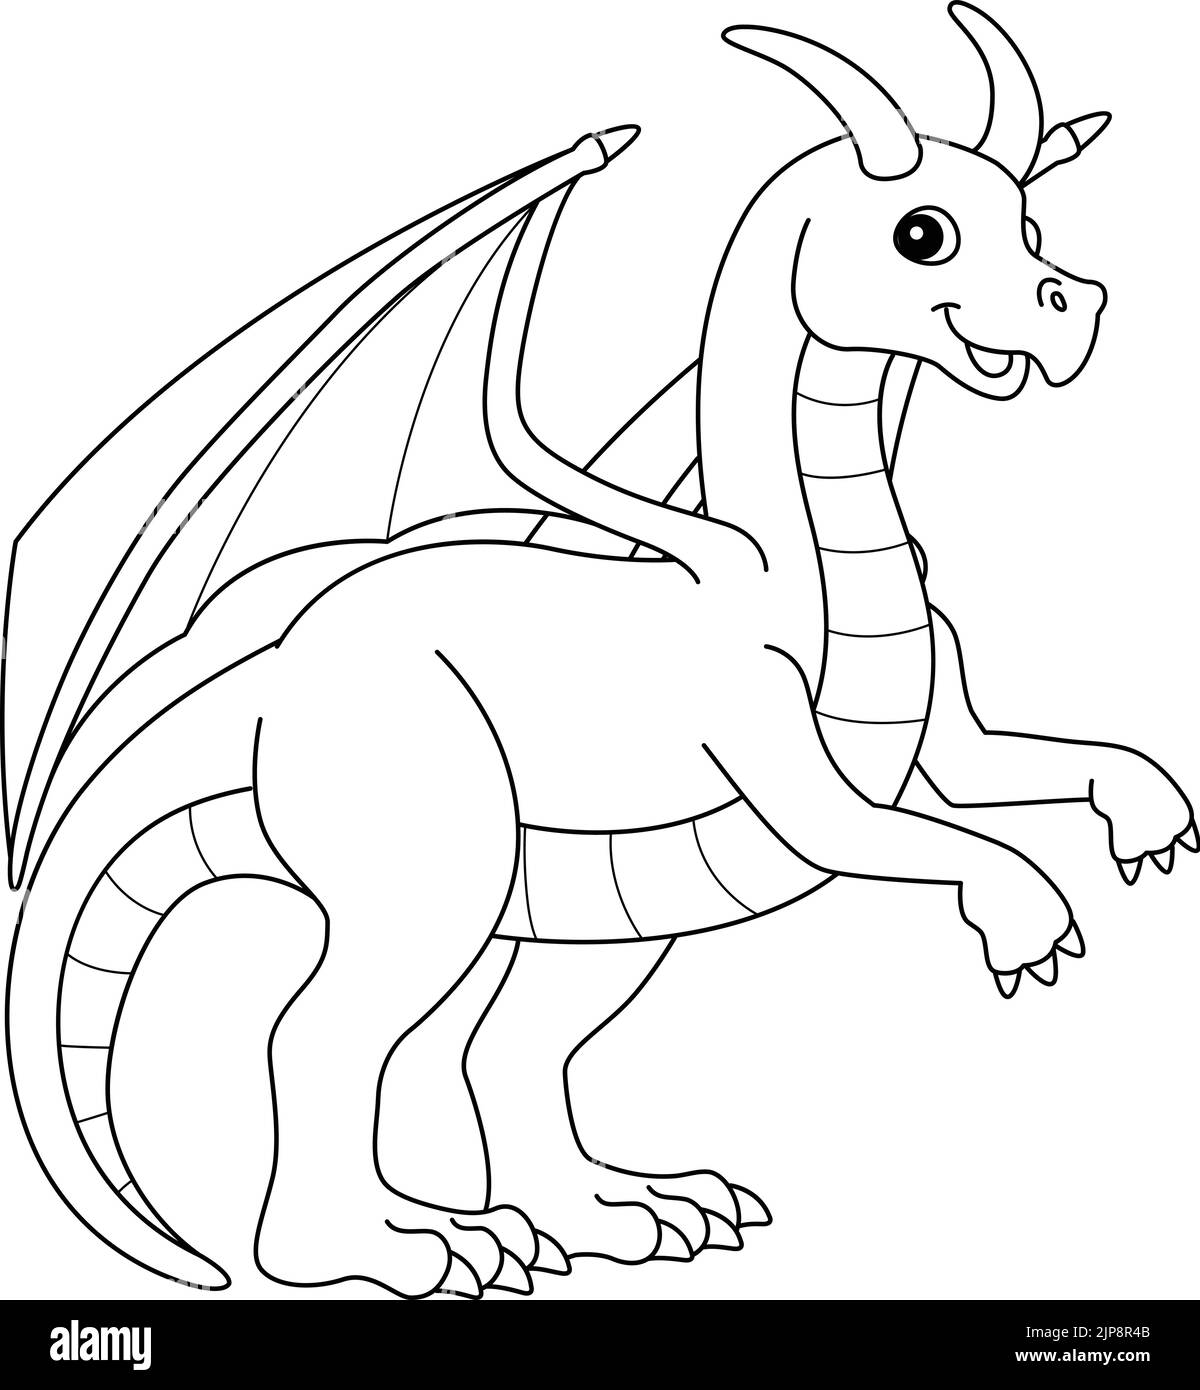 Dragon Animal Isolated Coloring Page for Kids Stock Vector Image & Art ...